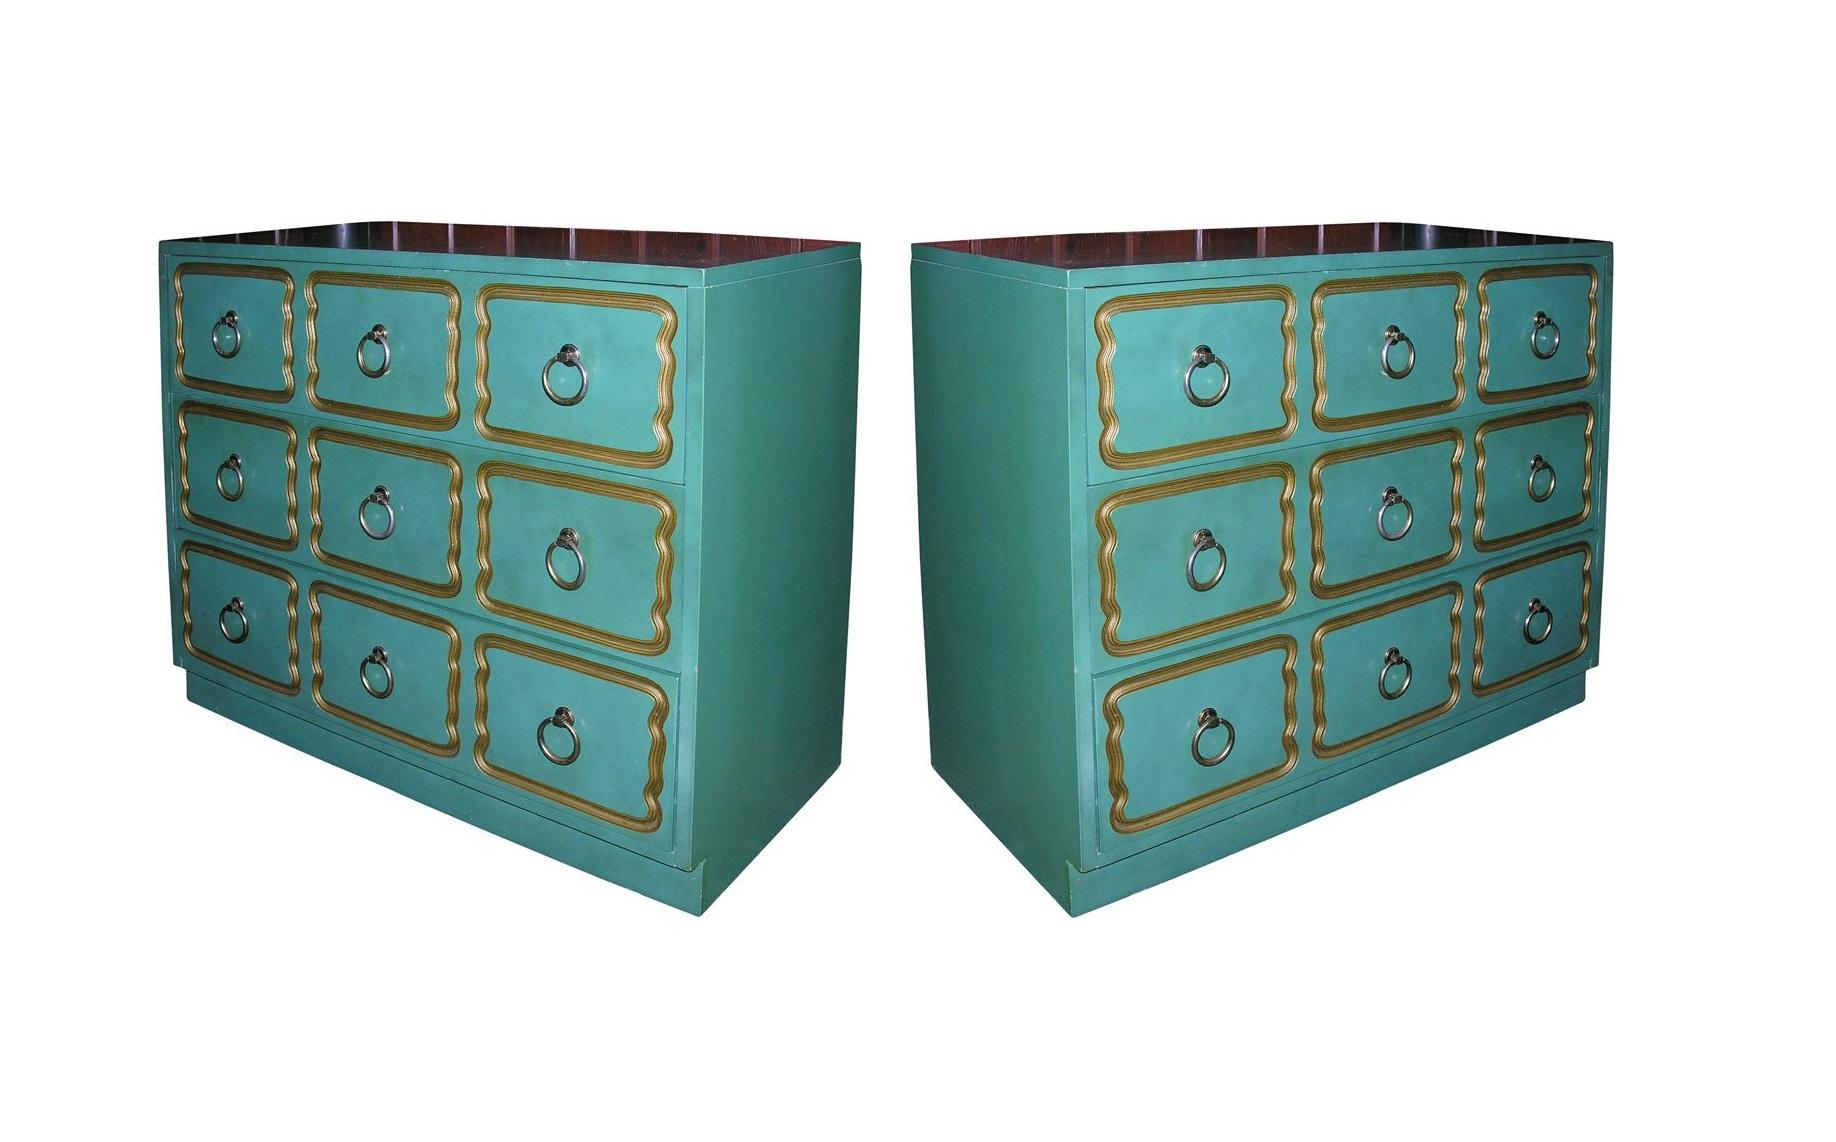 The most well-known, the España Bunching chest, was designed by Dorothy Draper in the 1950s at the request of the Spanish government who sought to raise the profile of Spanish design in the international market. Originally manufactured by Heritage